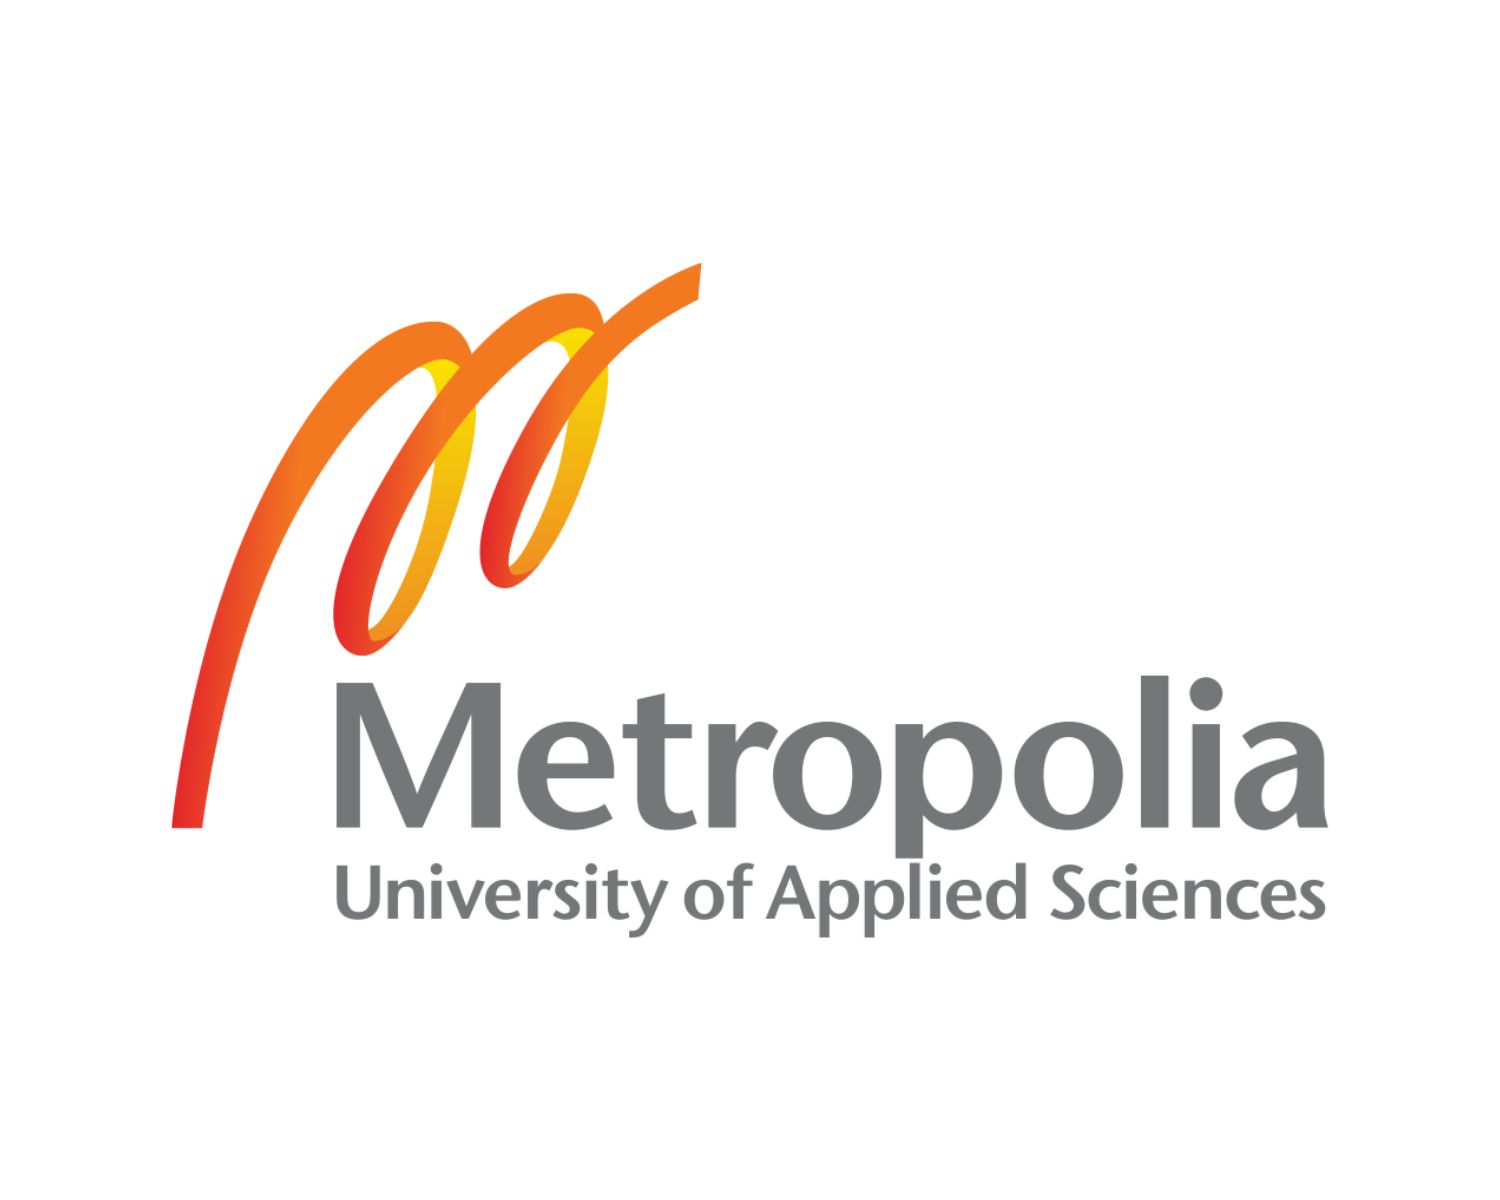 16-extraordinary-facts-about-metropolia-university-of-applied-sciences